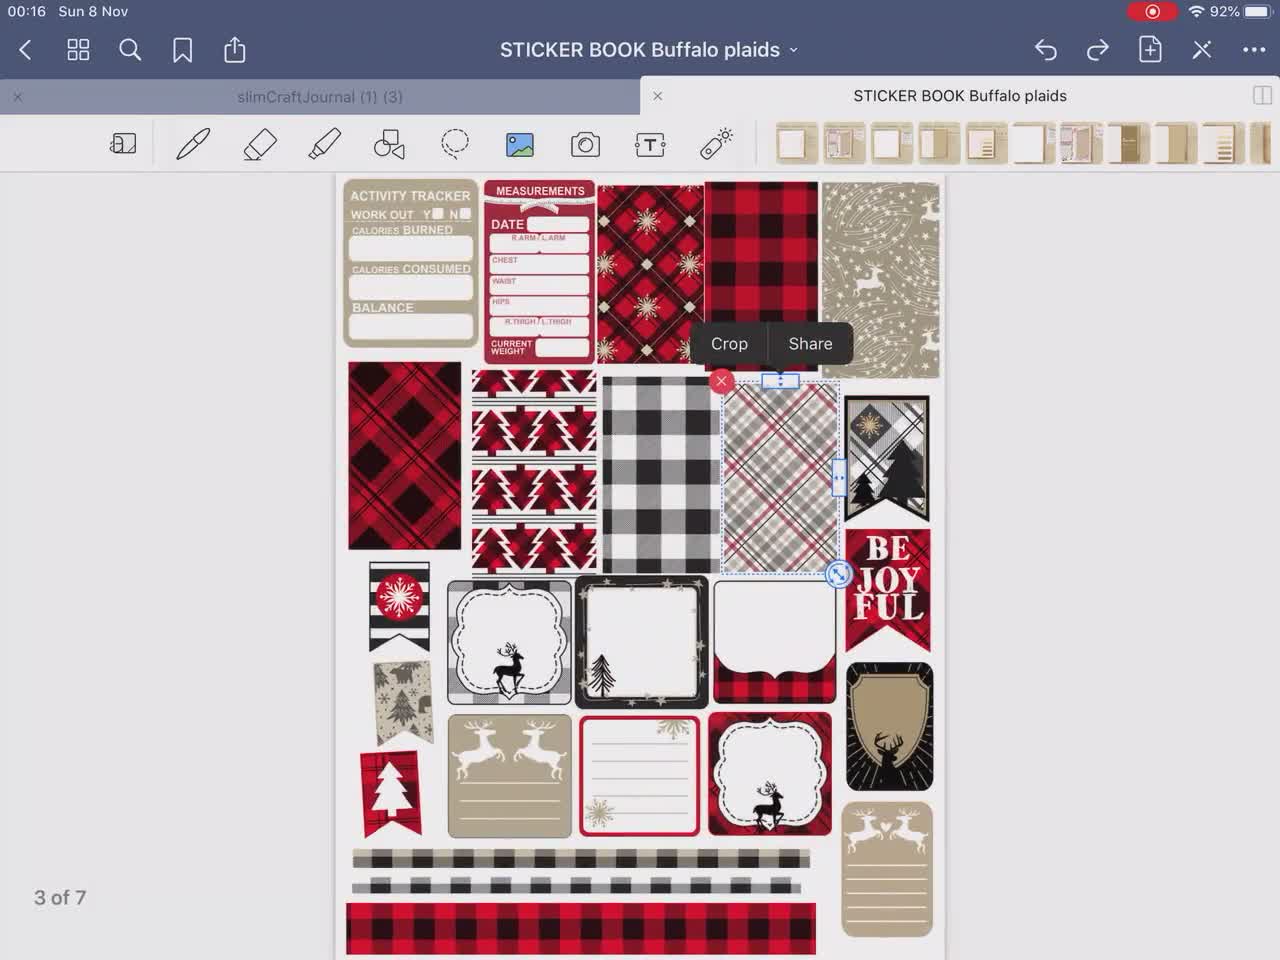 Printable CHRISTMAS Planner Stickers, Christmas Scrapbook Stickers